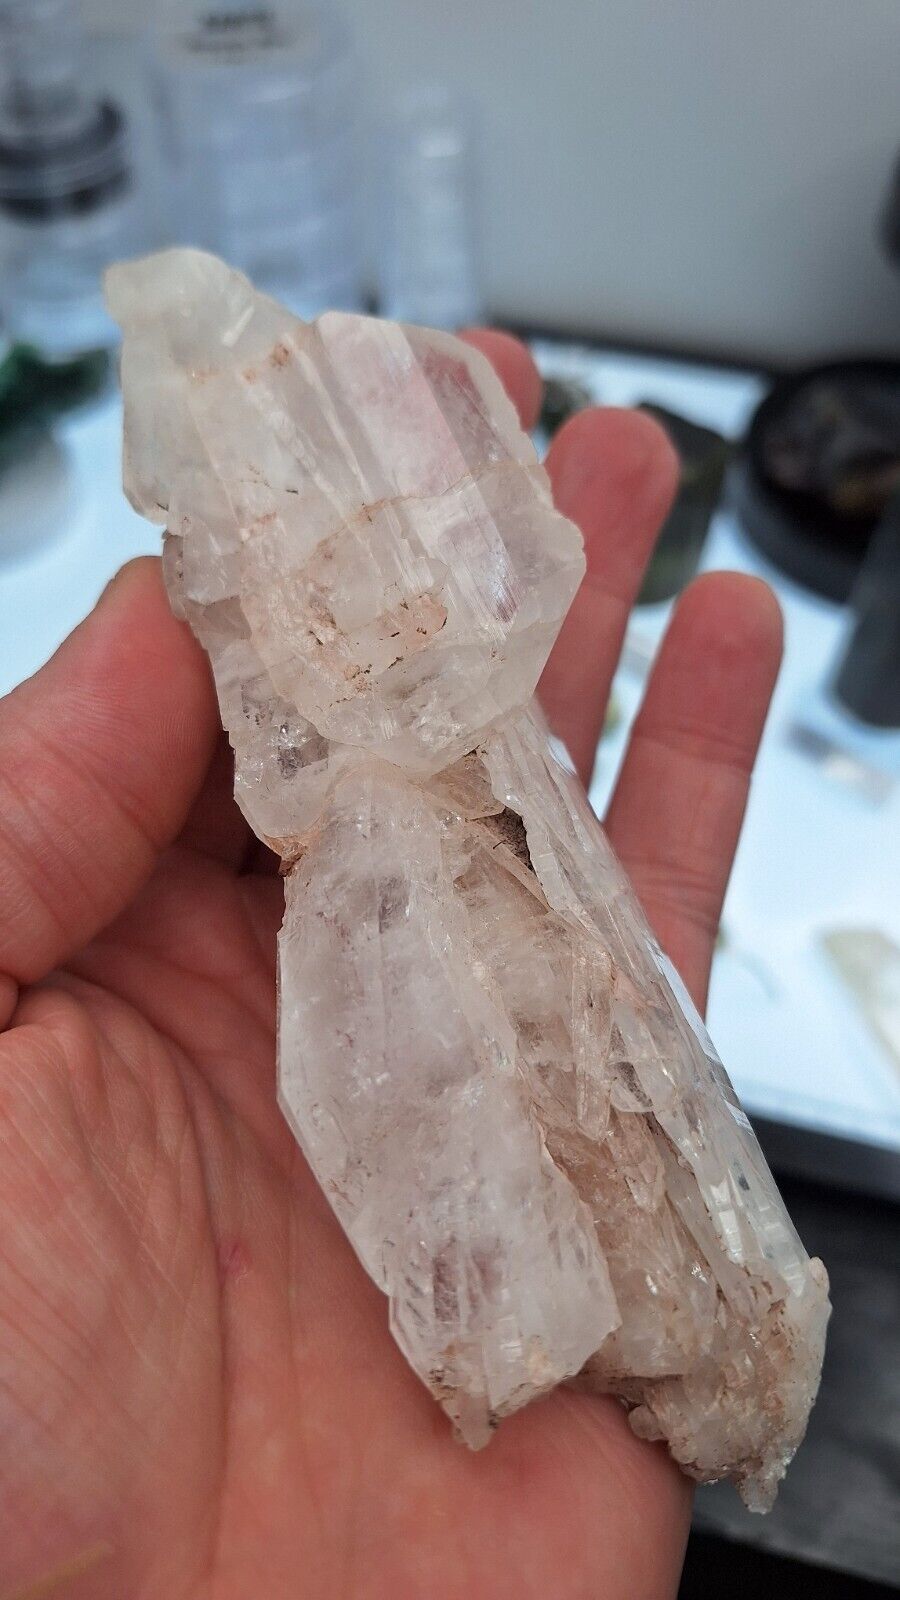  RARE Pink Faden Quartz Crystal 🪷, With Rainbows 🌈🌈 ( Colombia )🇨🇴 LG.💎😋 